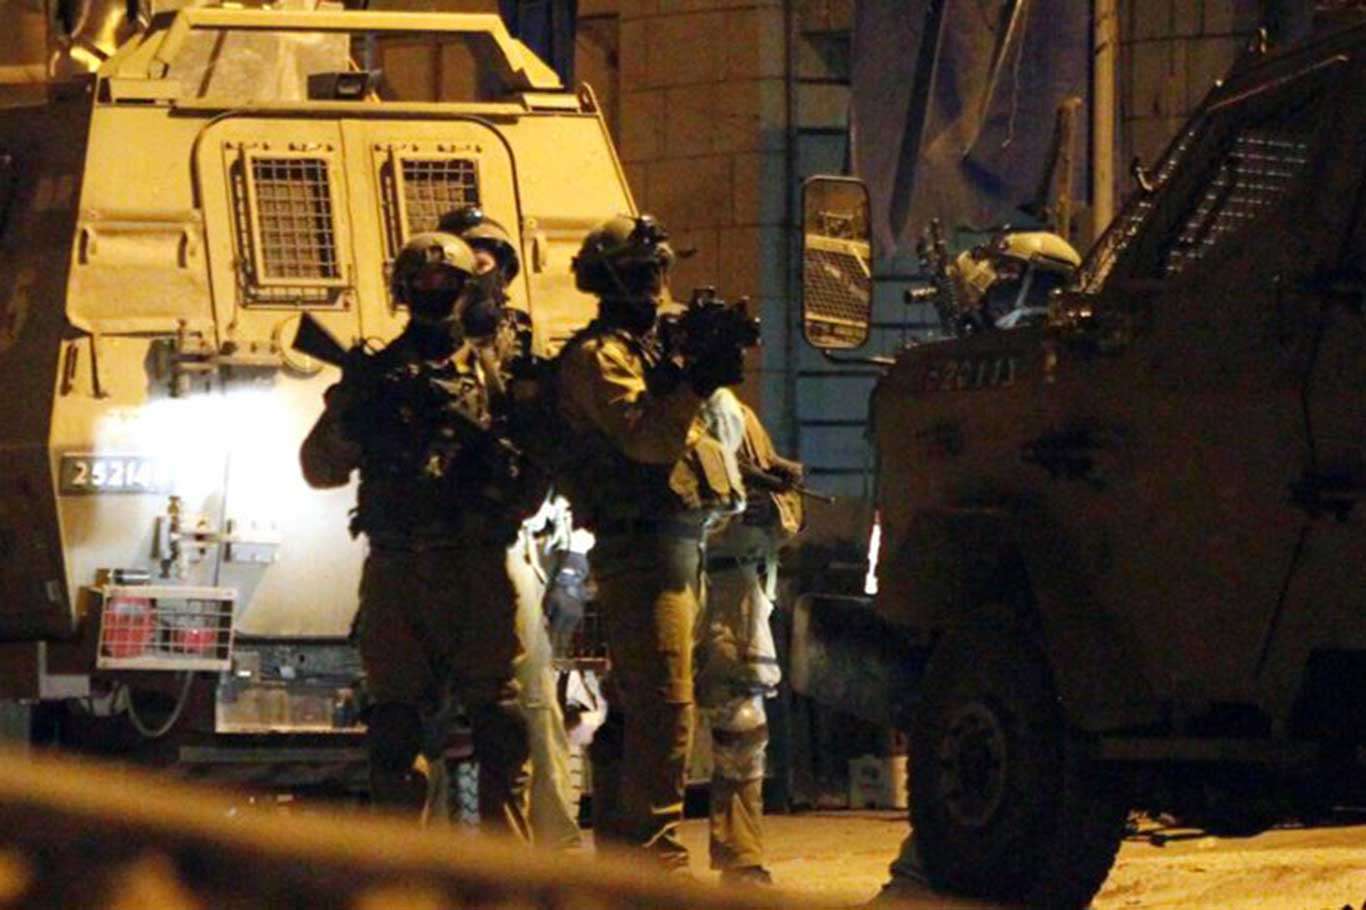 14 Palestinians kidnaped by zionist forces in W. Bank raids